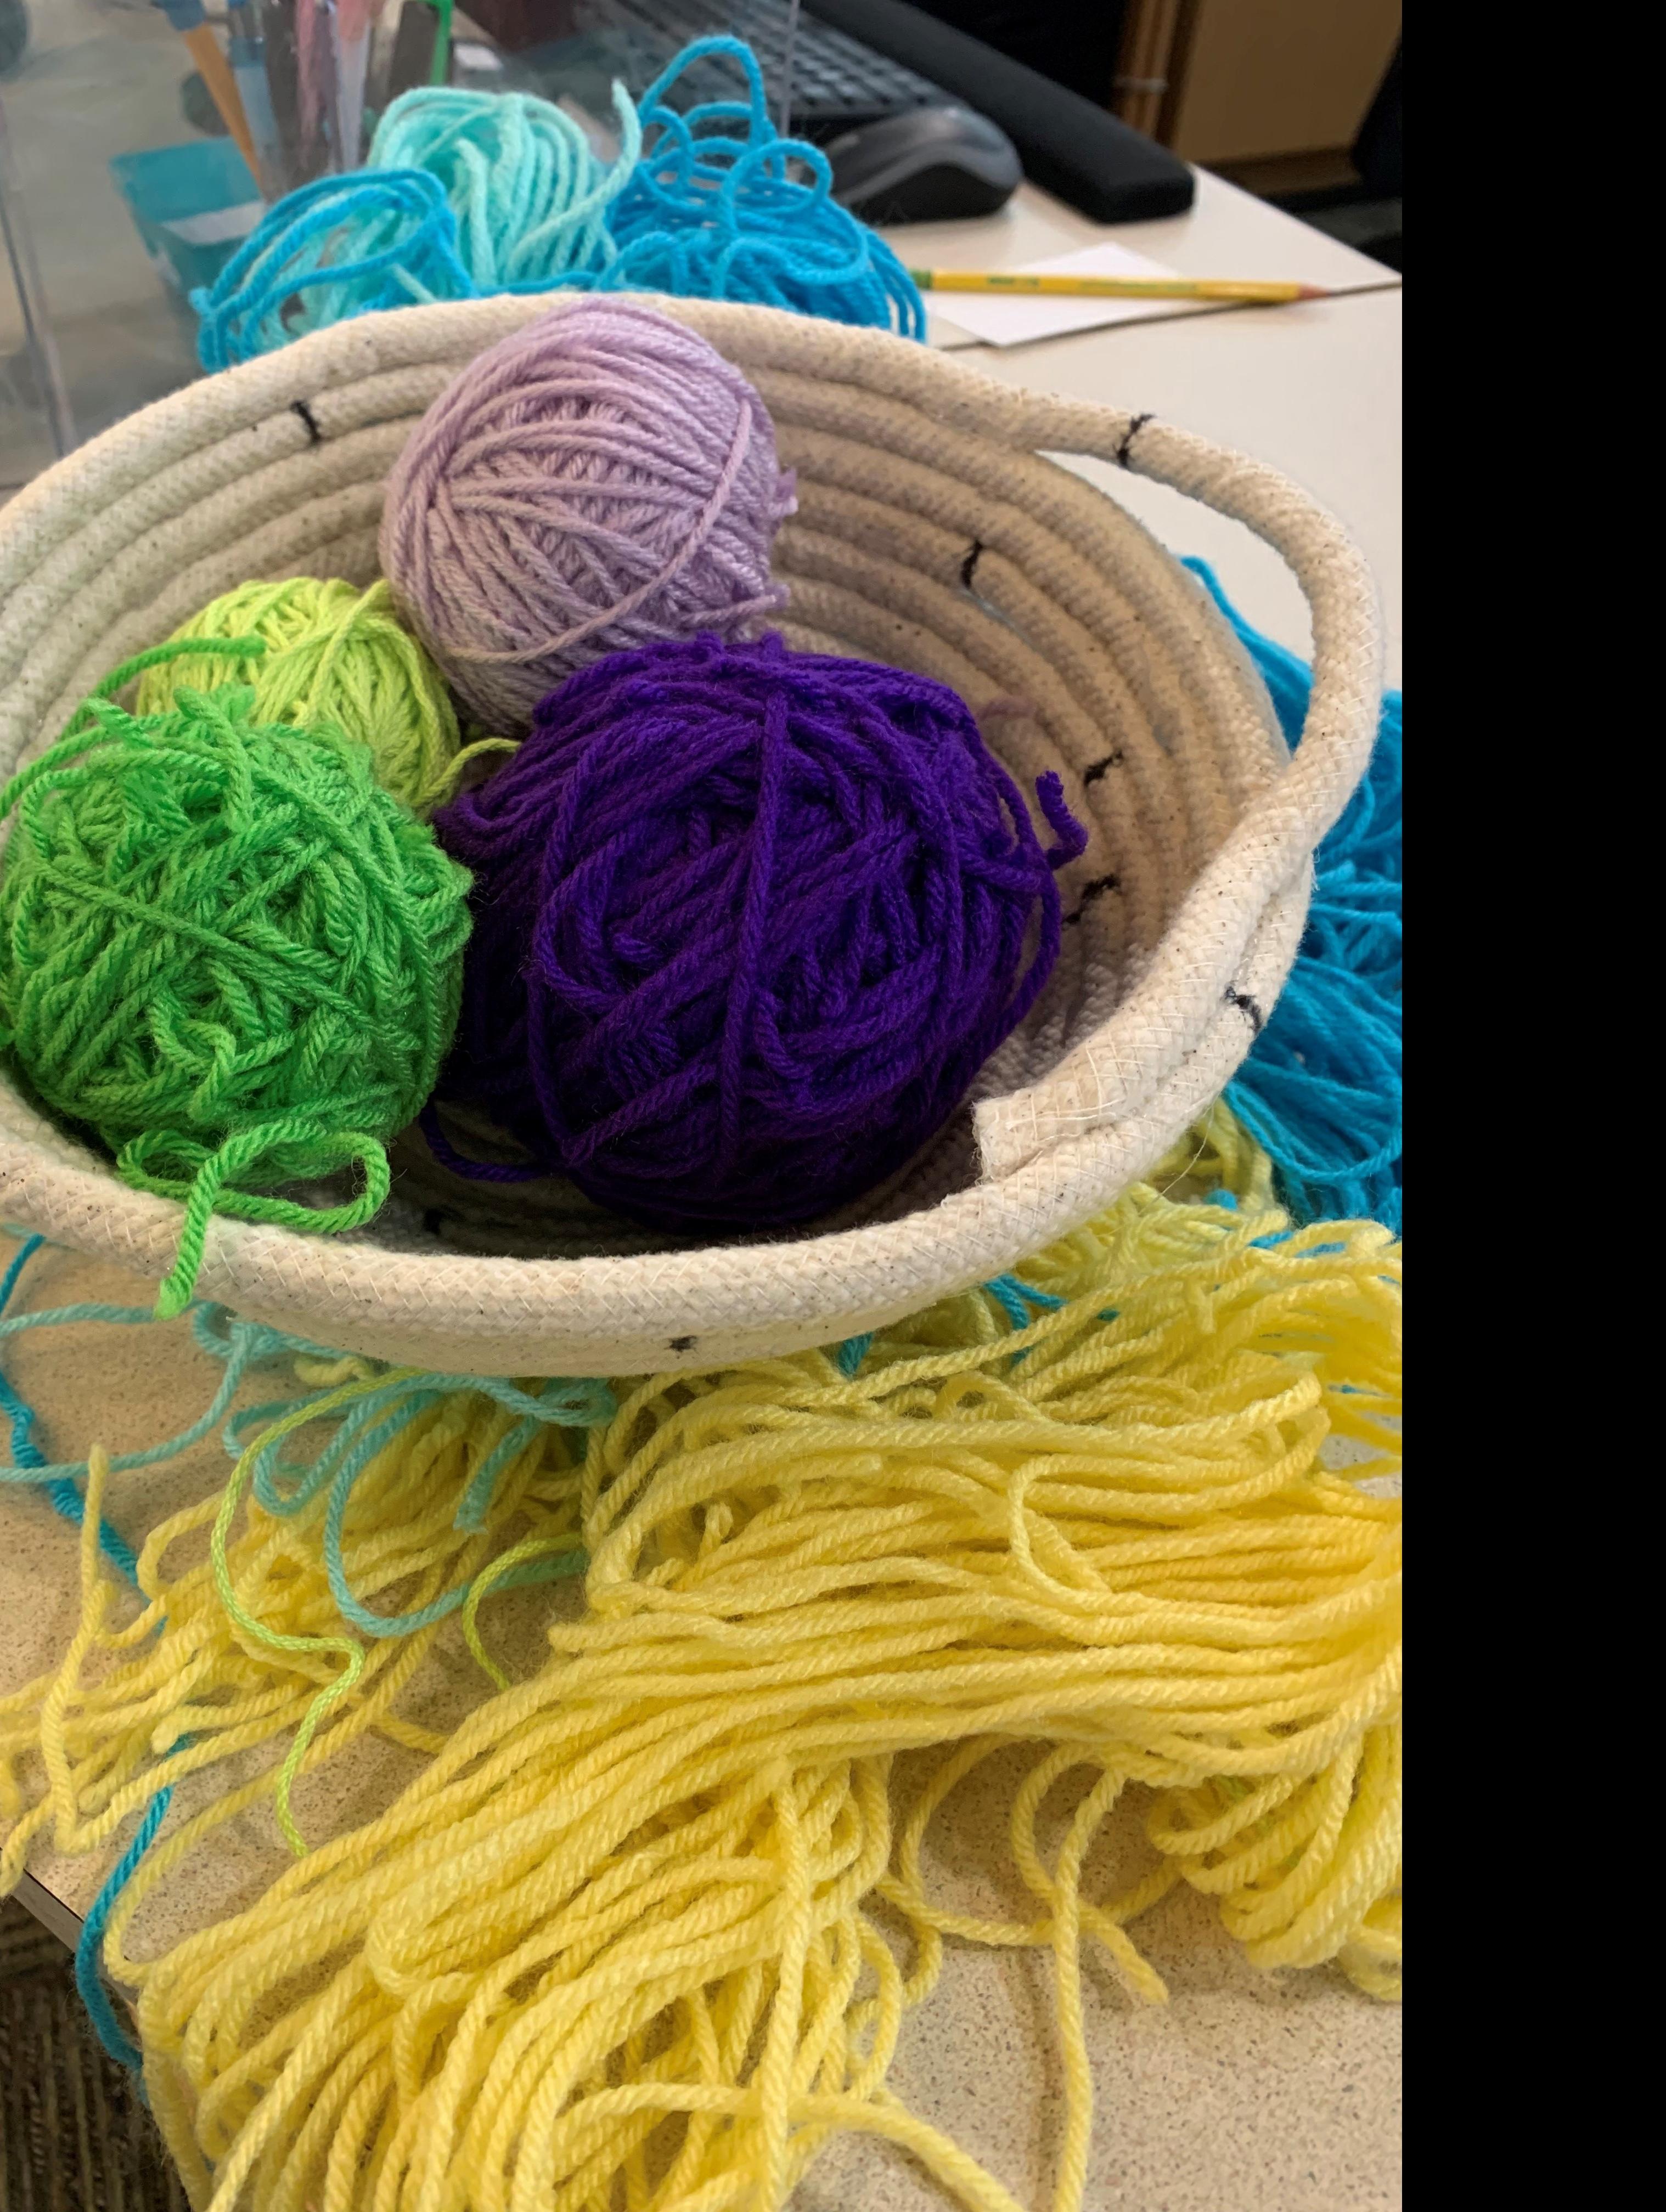 off white basket filled with yarn balls